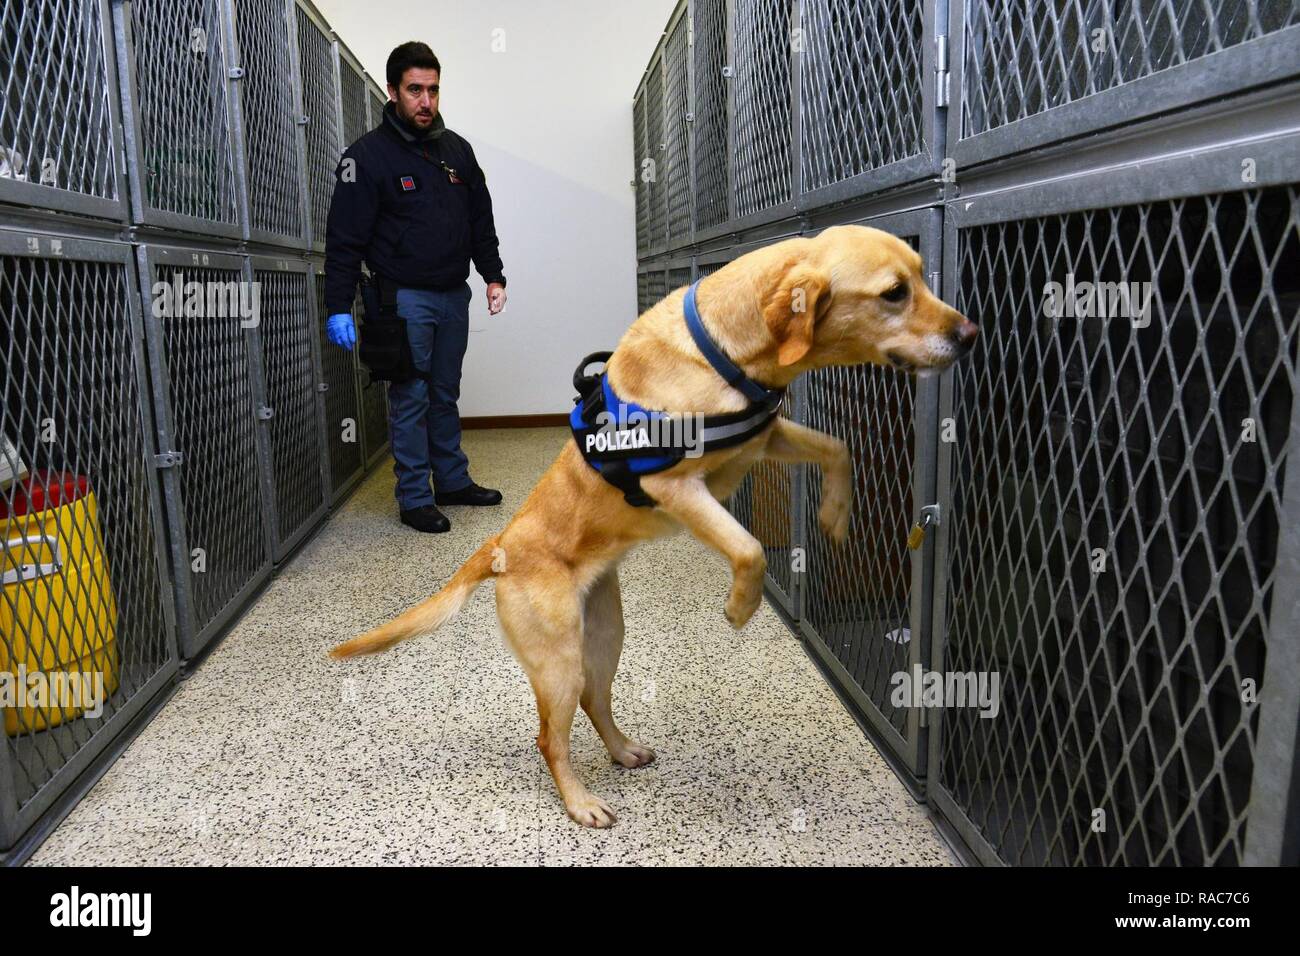 Italian military working dog Thunder and his handler Deputy Inspector Filippo Nicola, assigned to the Italian Police Squadra Cinofili K9 airport Venice, inspect areas that may have explosive residue at Caserma Ederle, Vicenza, Italy, Jan. 17, 2017. Military Working Dog teams are used in patrol, drug and explosive detection and specialized mission functions for the Department of Defense and other government agencies. The 525th Military Working Dog Detachment, joint training with Italian Police Squadra Cinofili K9 airport Venice and Questura di Padova and U.S. Air Force. Stock Photo